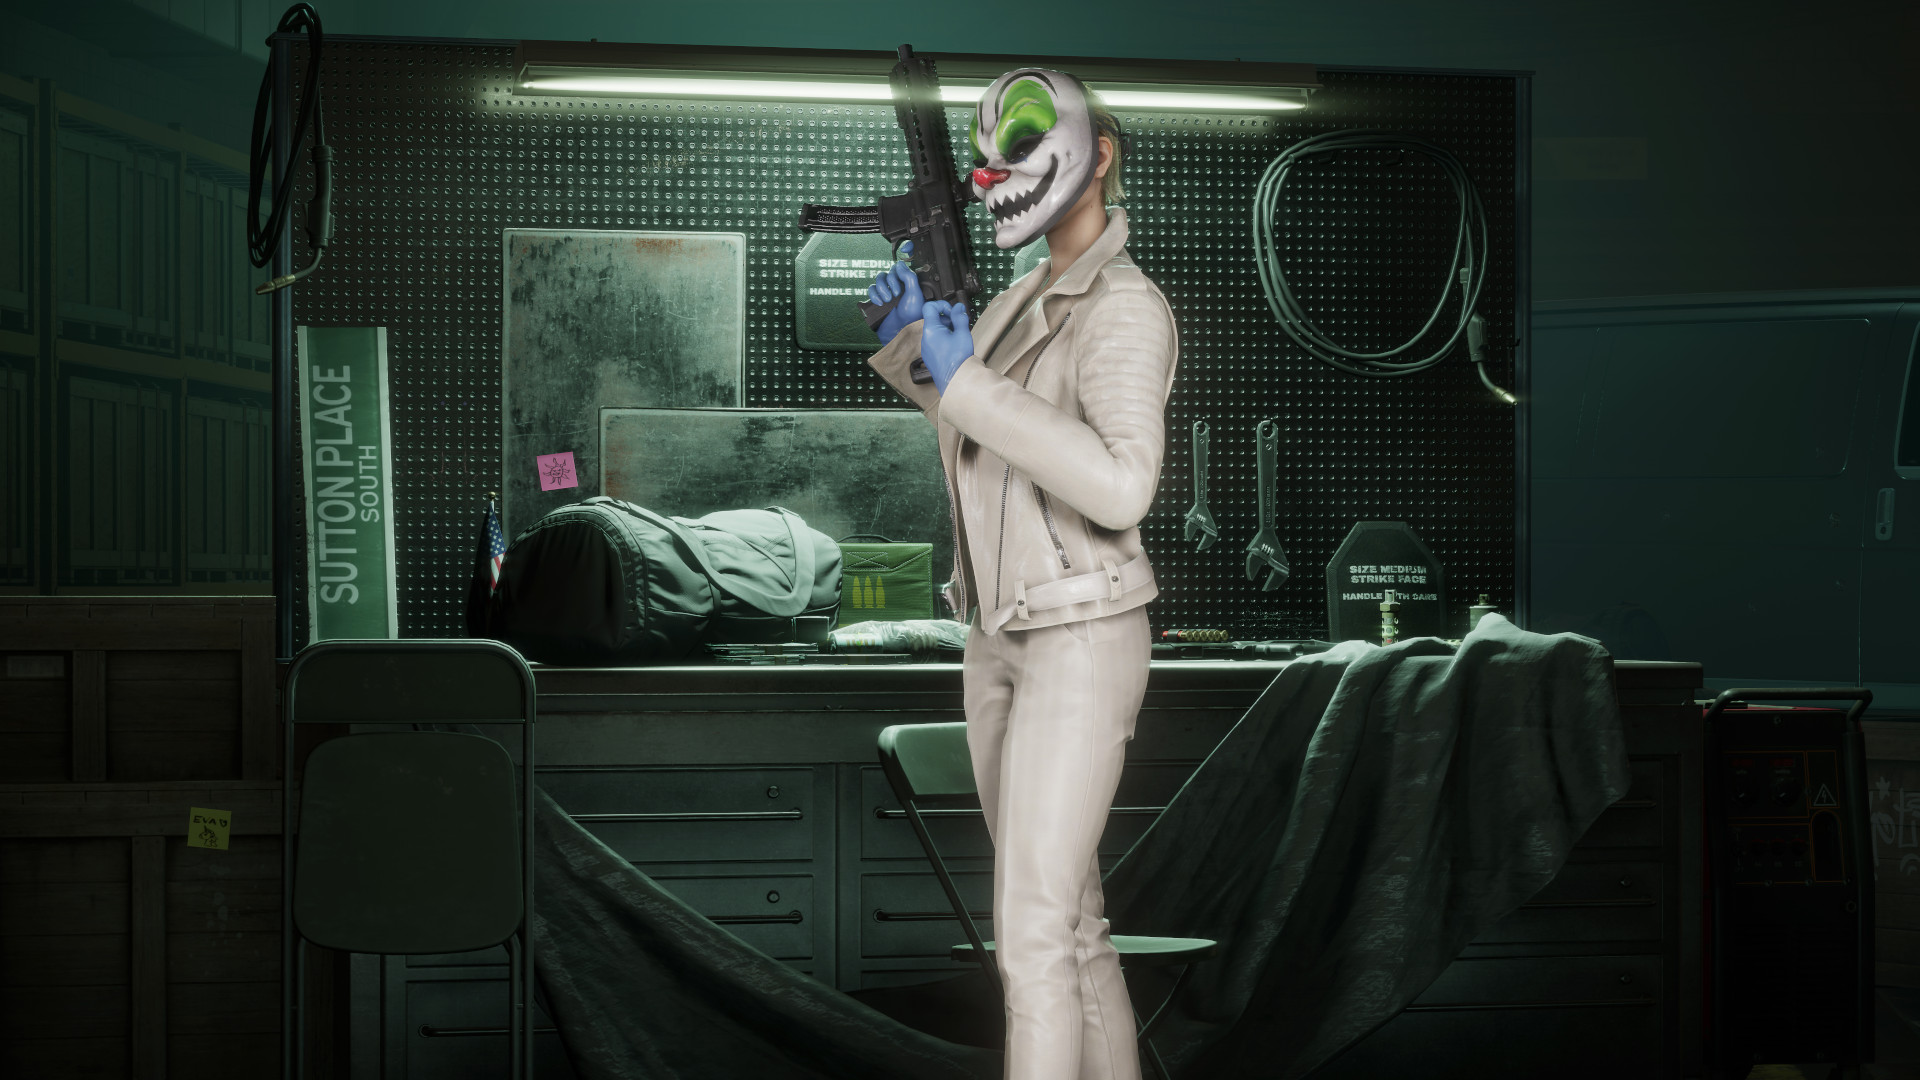 Which characters are coming to Payday 3 at launch?